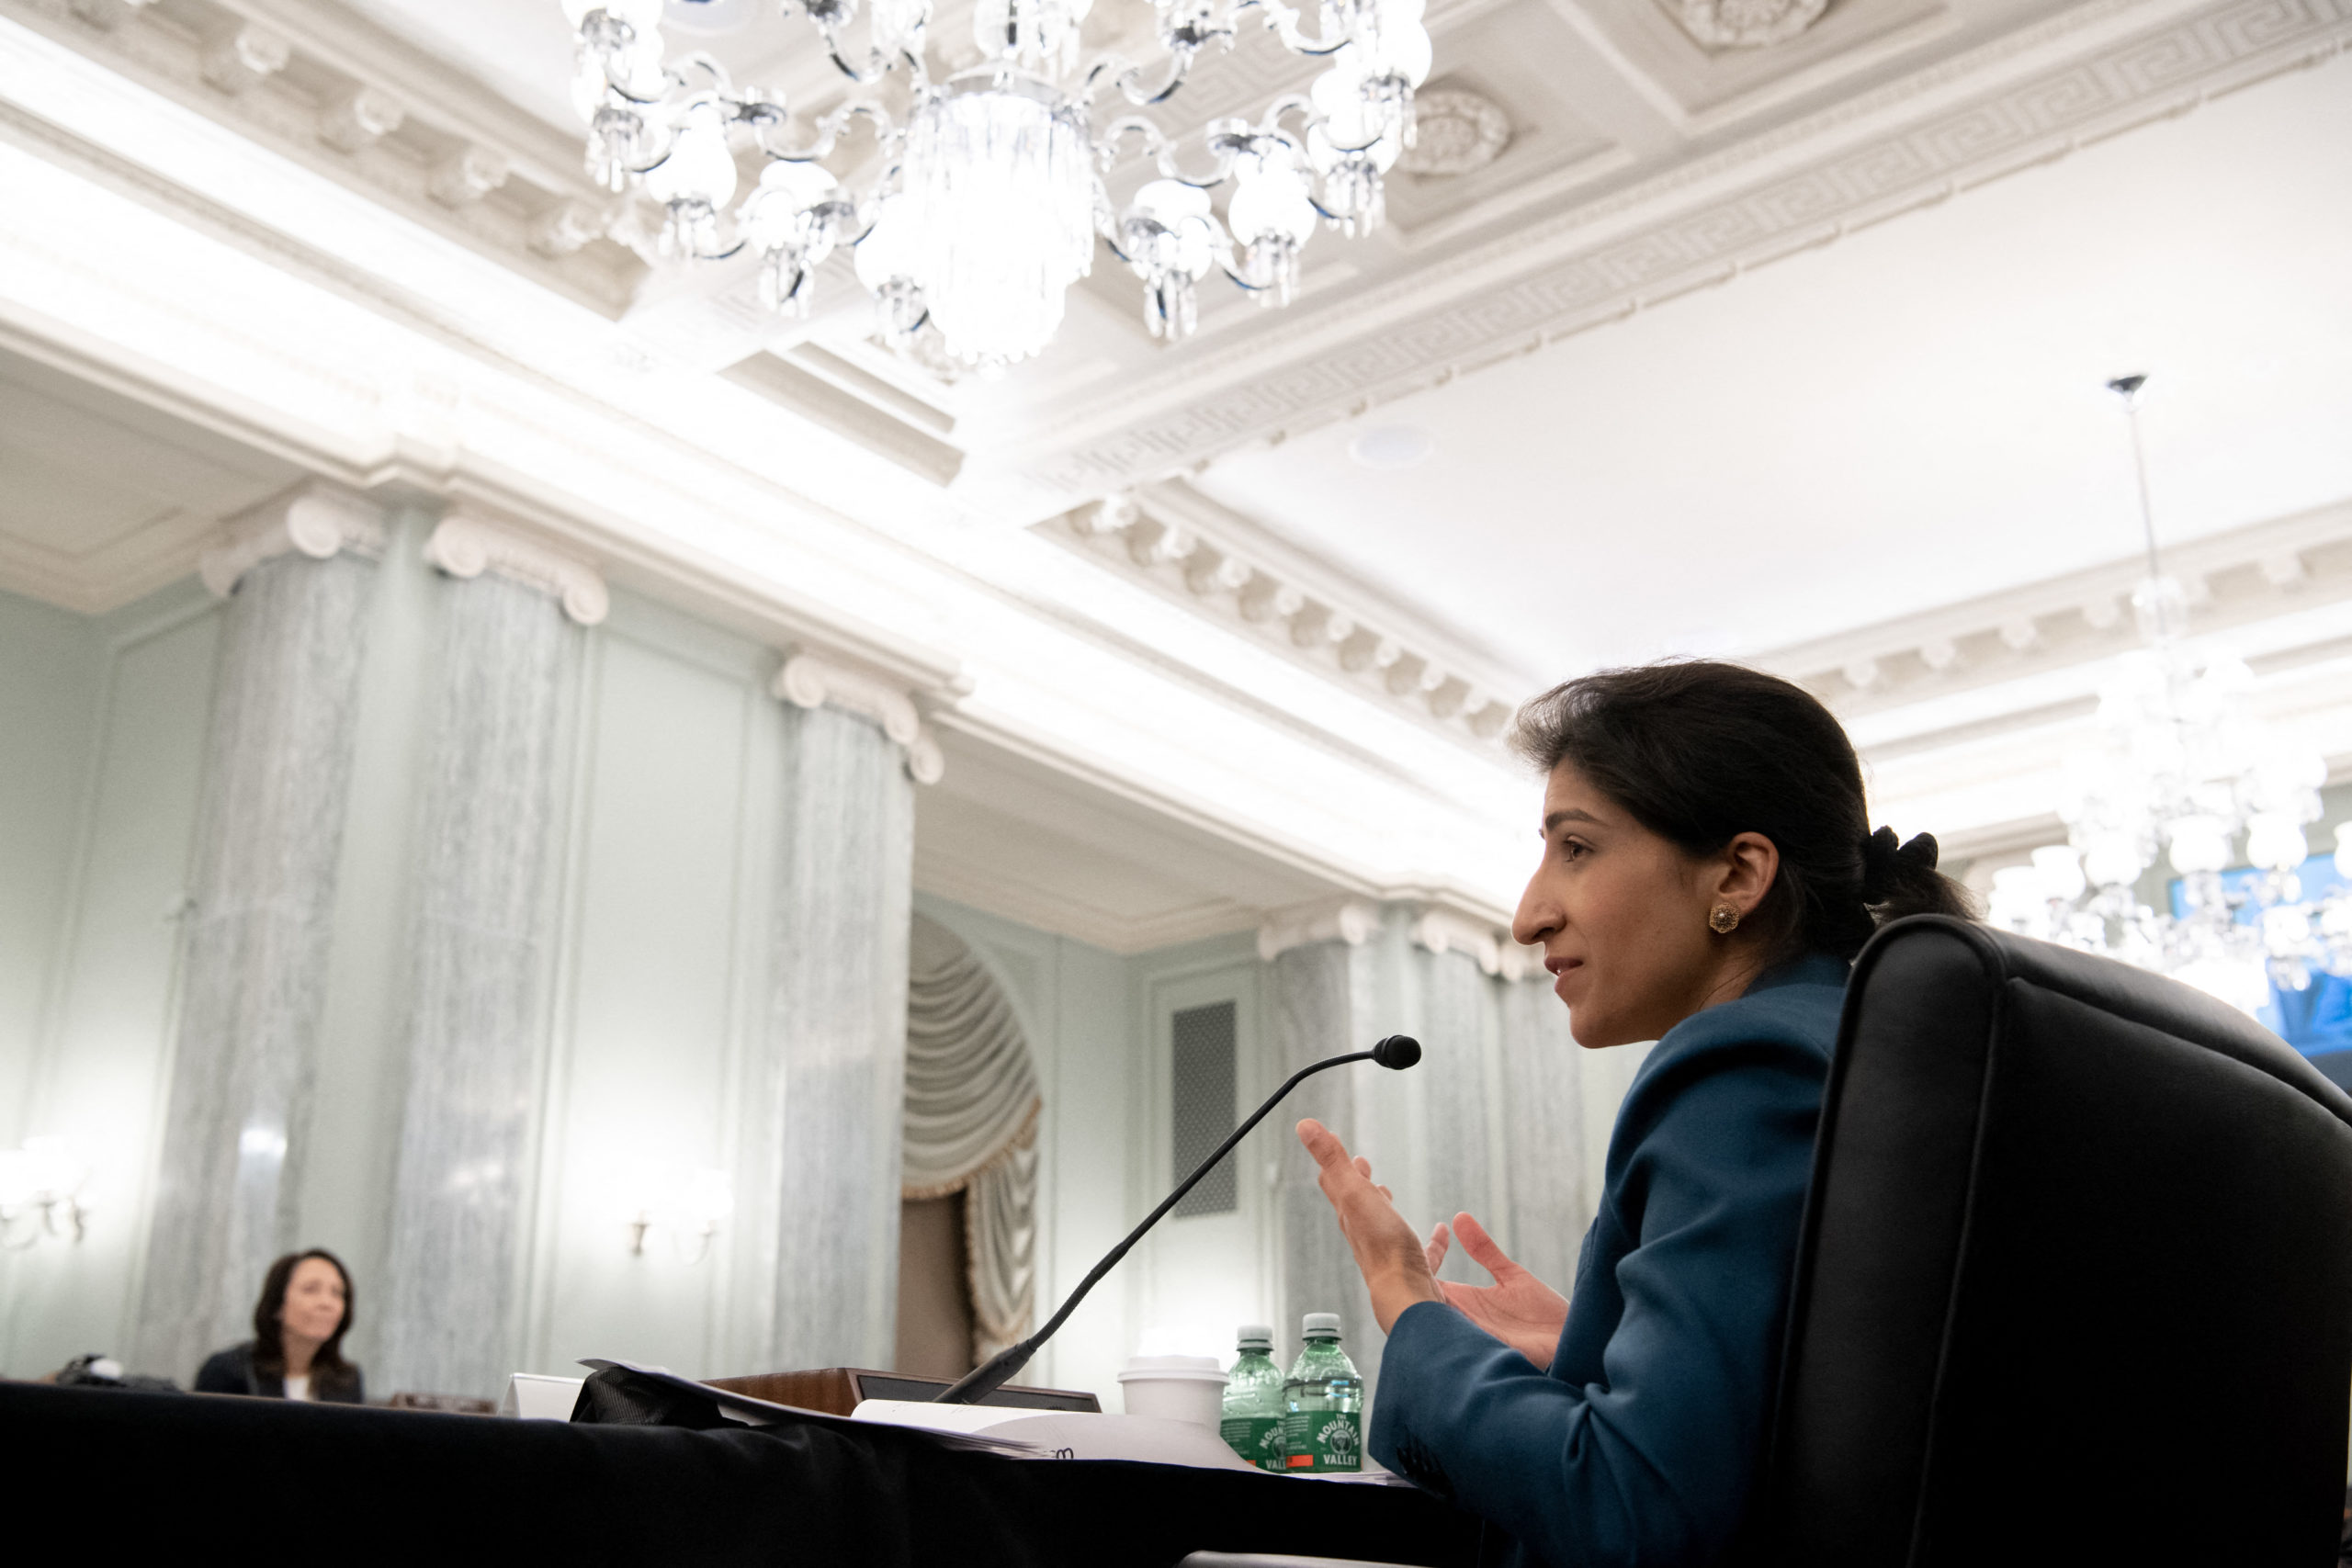 Federal Trade Commission Chair and Big Tech critic Lina Khan testifies during a Senate Committee hearing on April 21. (Saul Loeb/Pool/AFP via Getty Images)